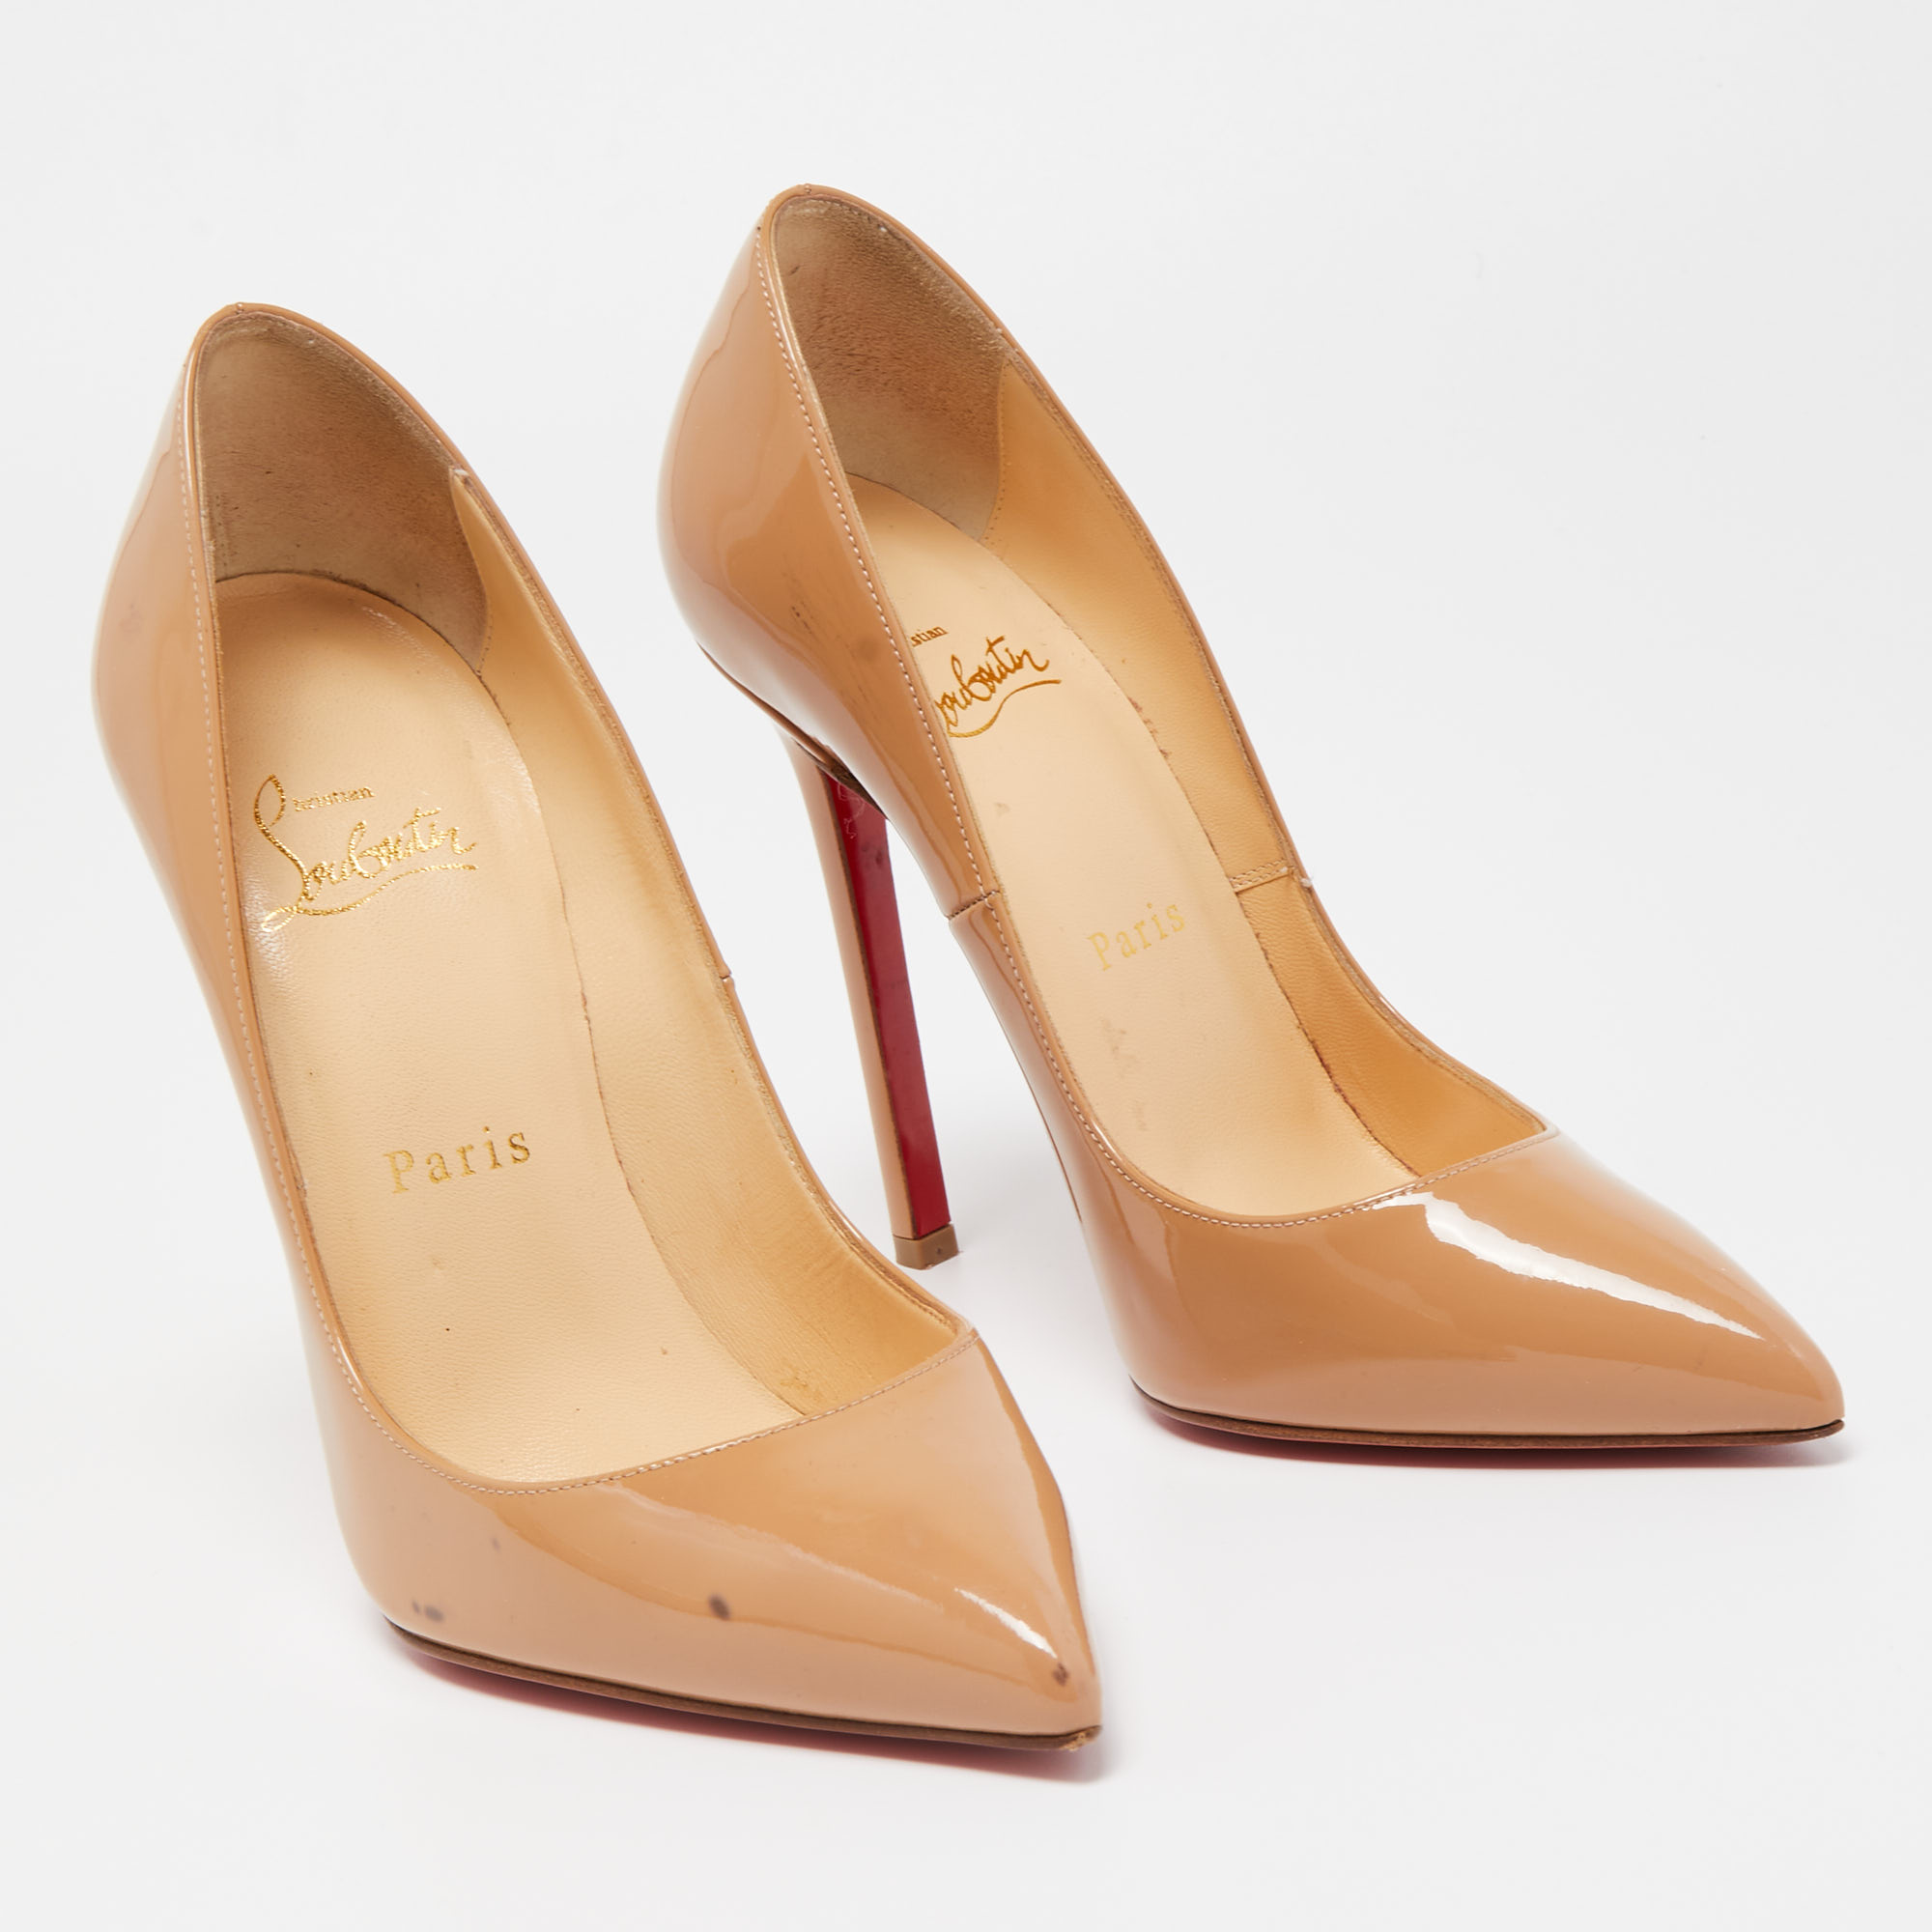 Christian Louboutin Beige Patent Leather So Kate Pointed Toe Pumps Size 37.5